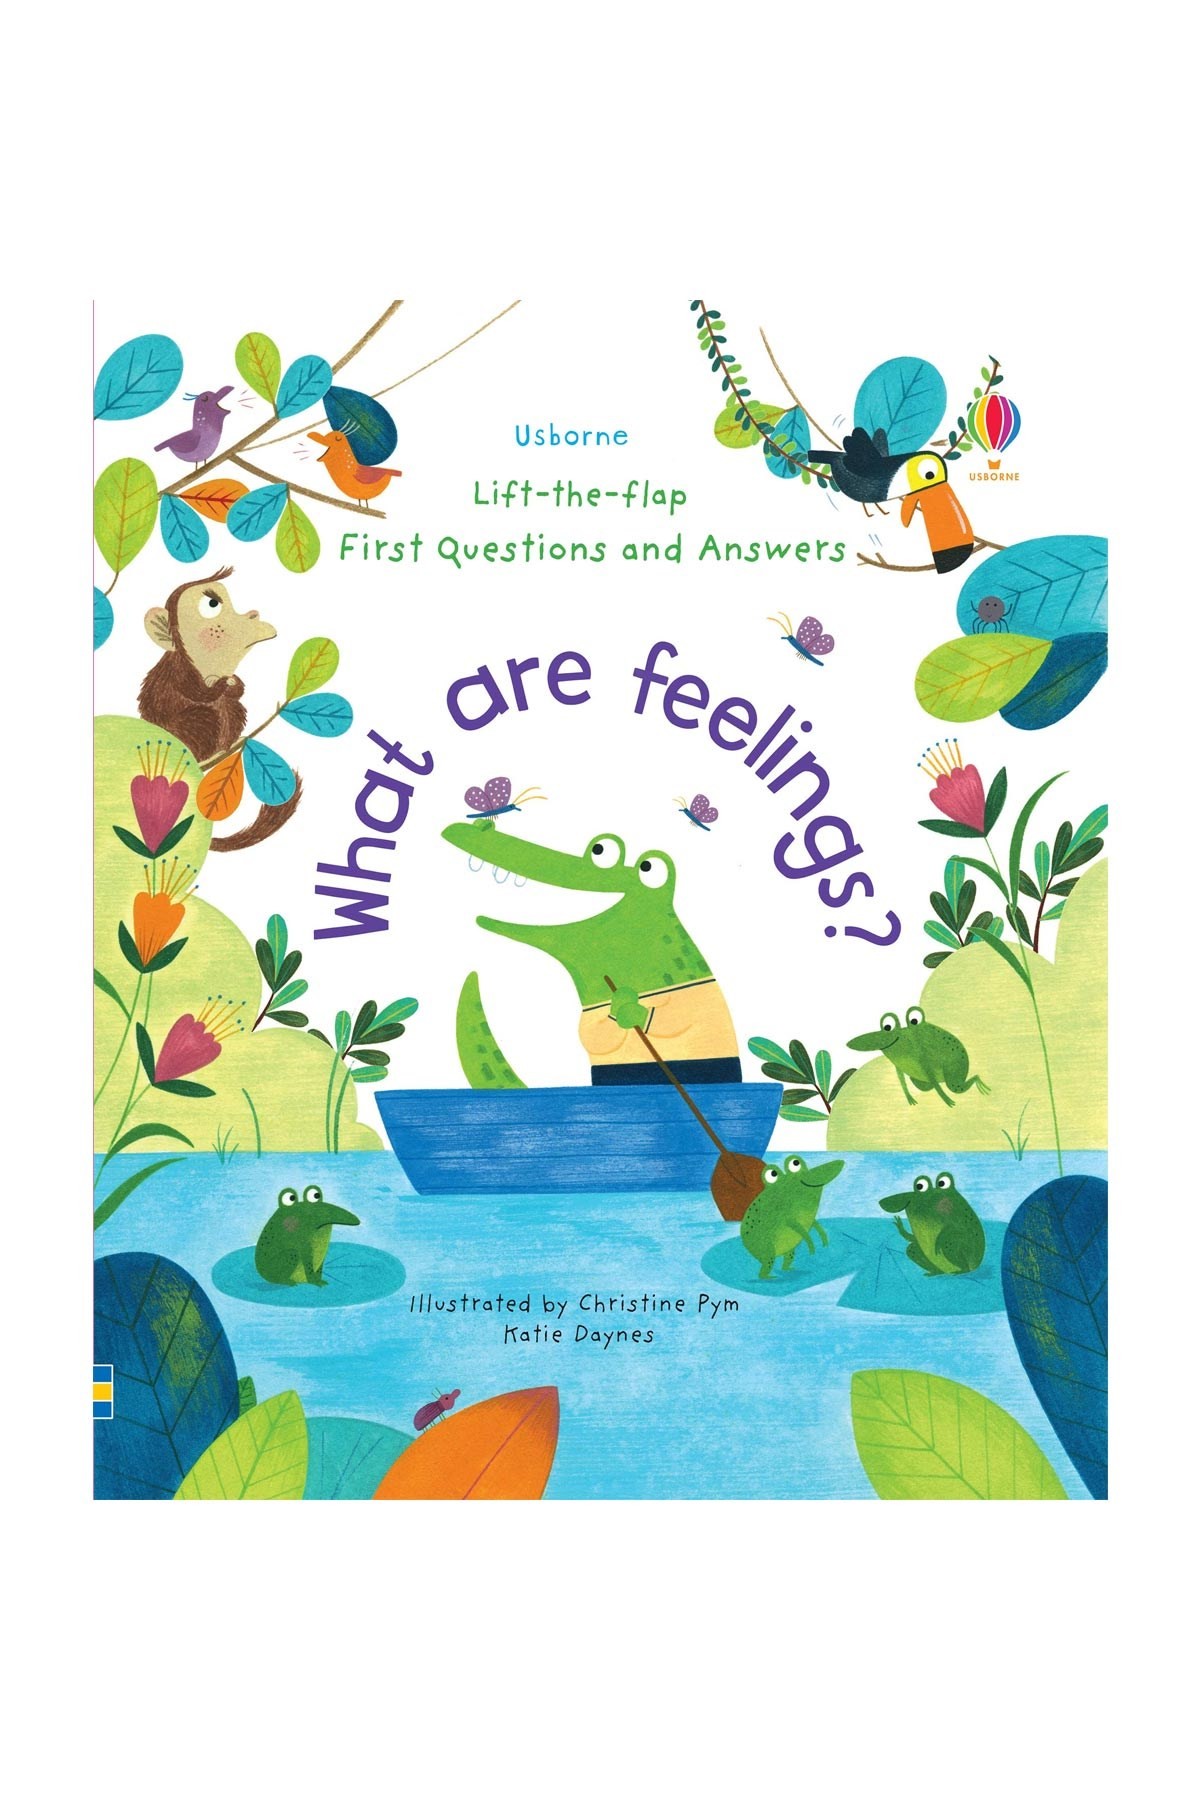 The Usborne What are Feelings